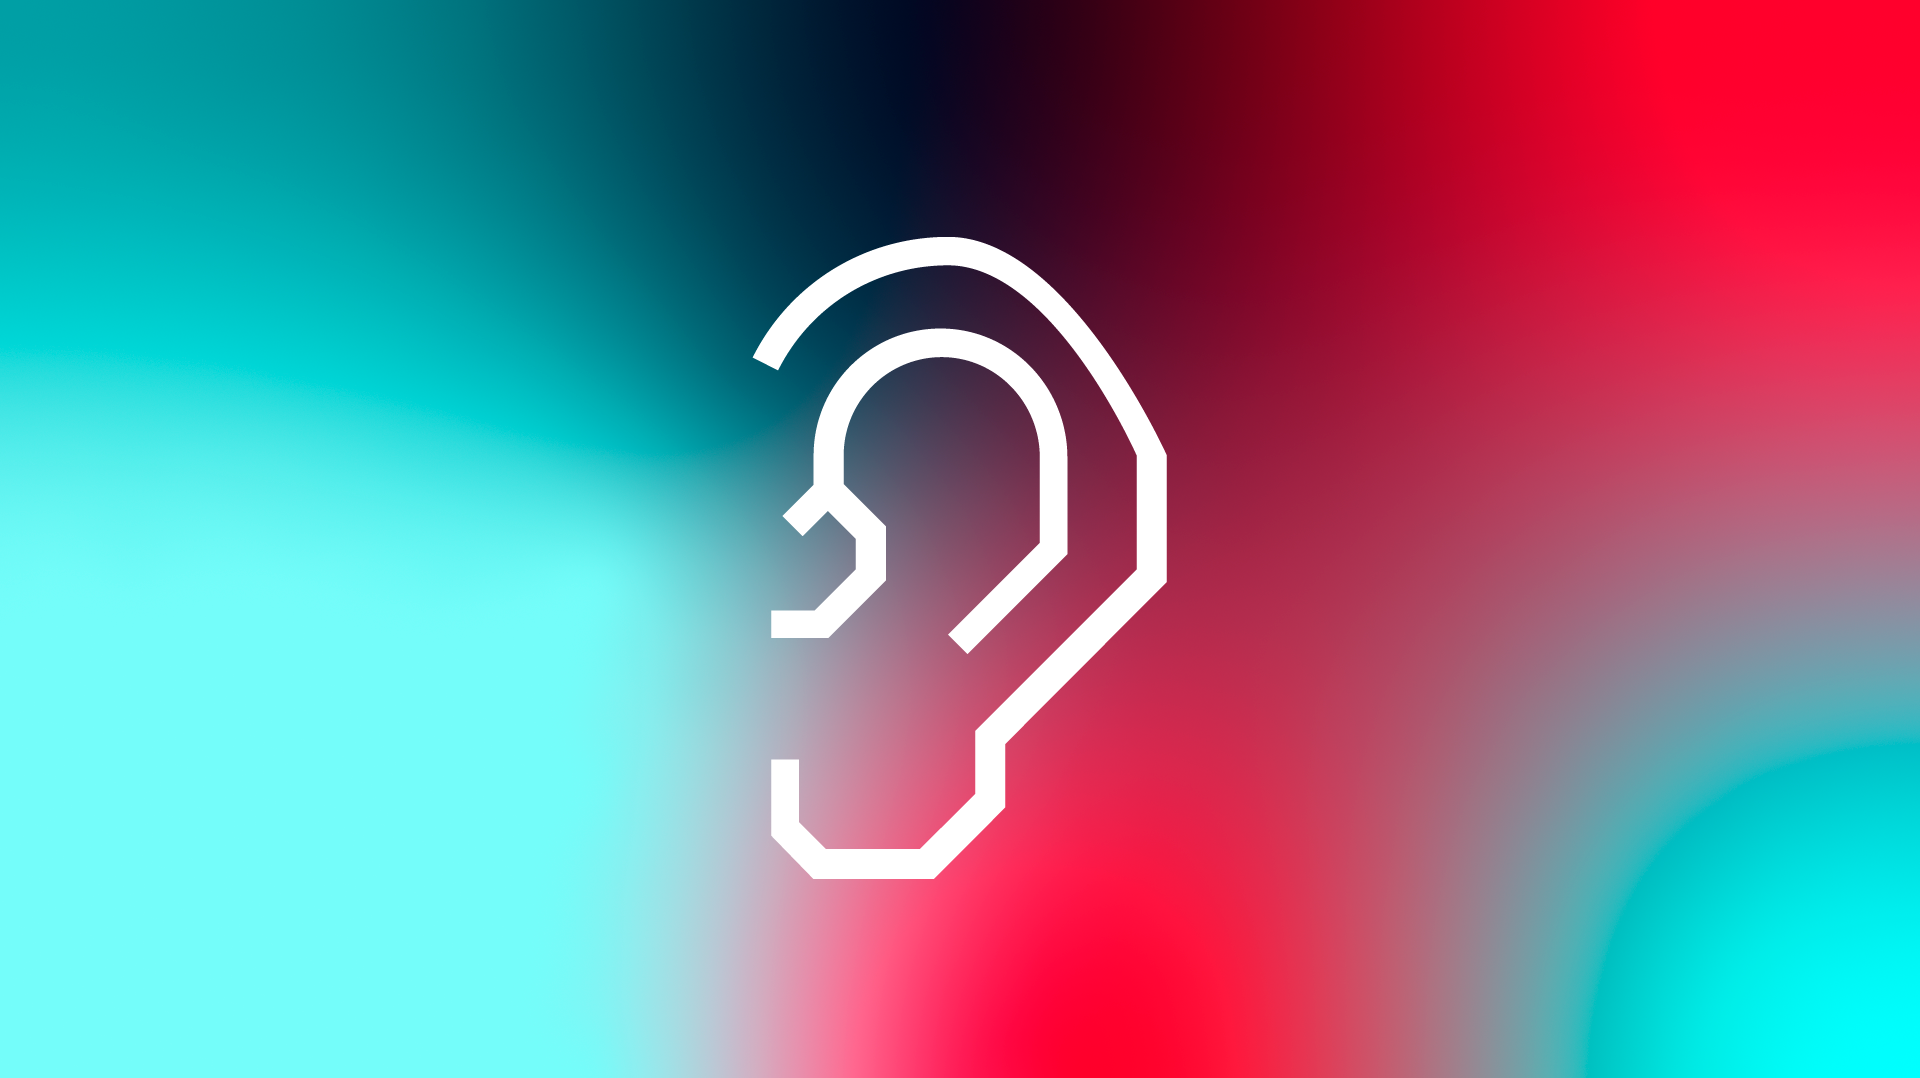 A stylized white ear on a bright colourful background.